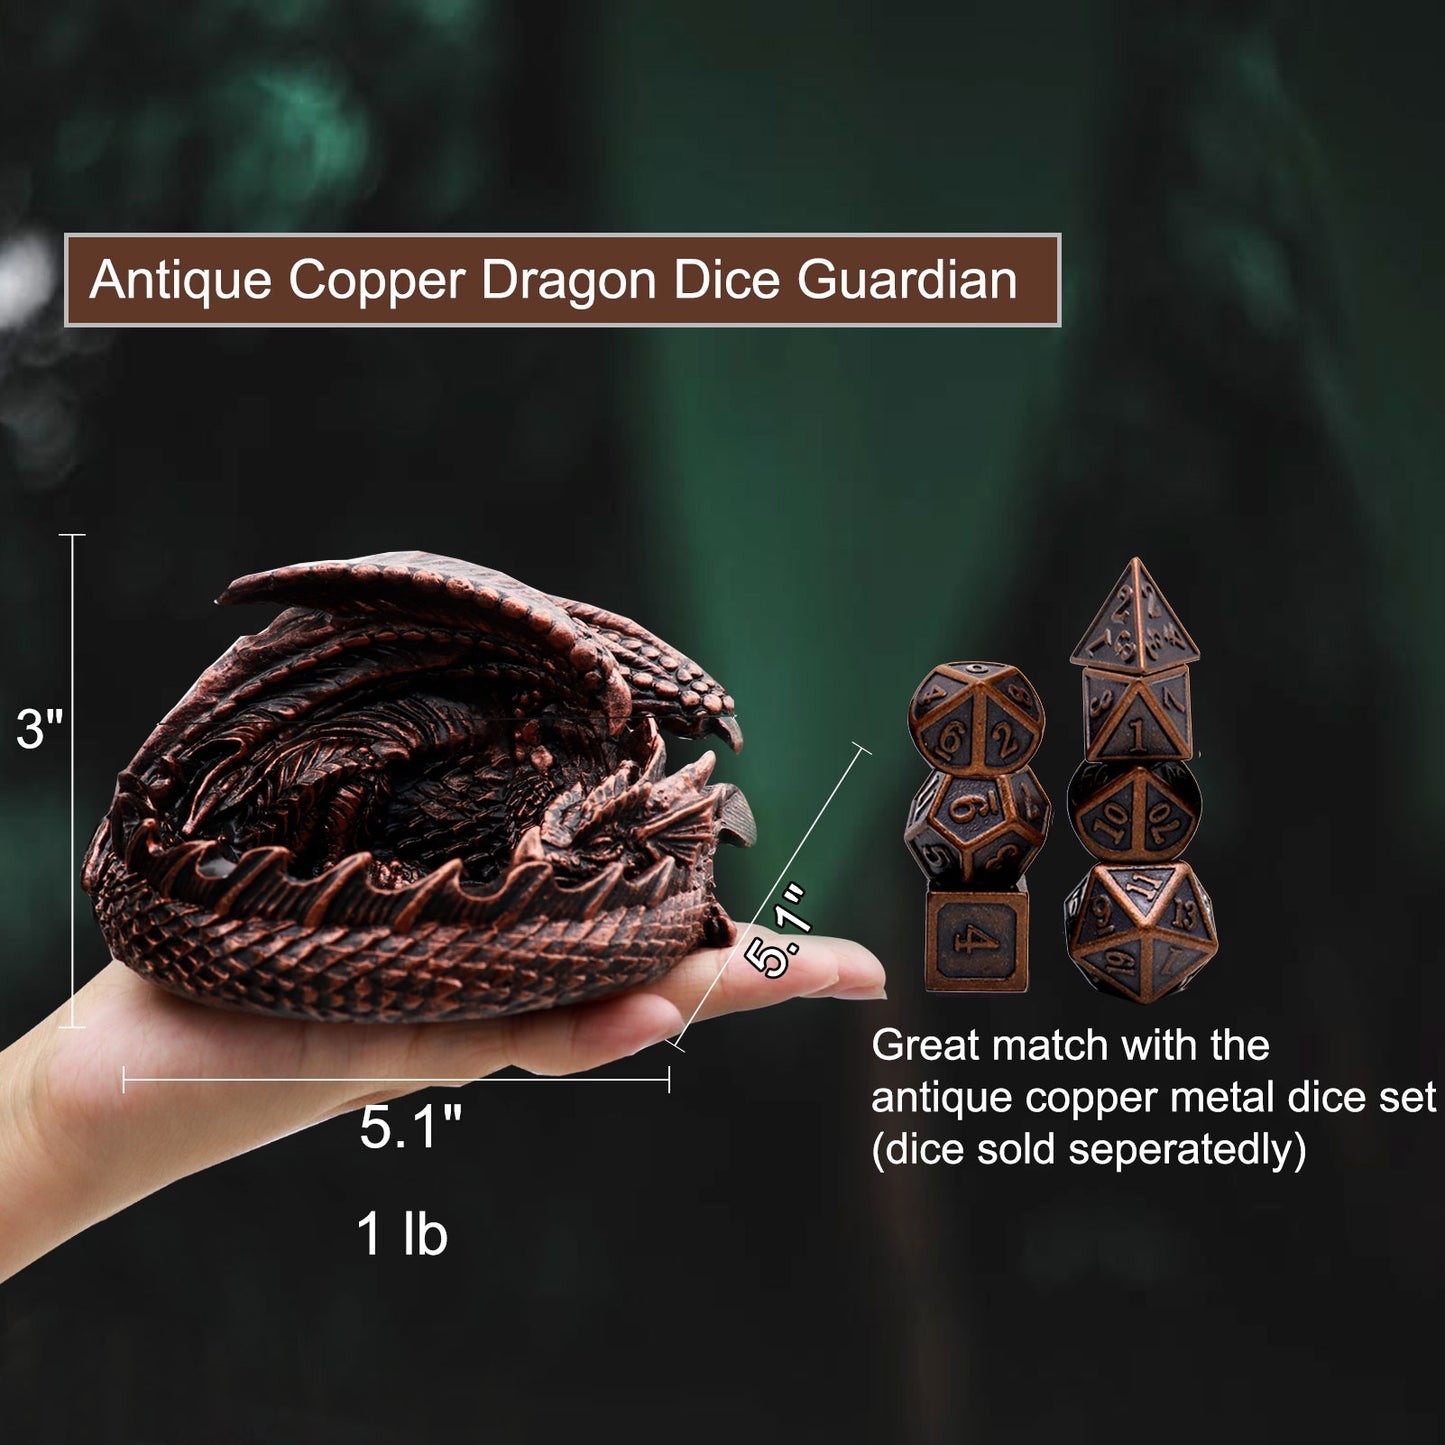 Haxtec Dragon Dice Jail Guardian DND Dice Tray Holder Dungeons and Dragons Accessories Novelty DM RPG Gift Dragon Statue Decor(Antique Copper)